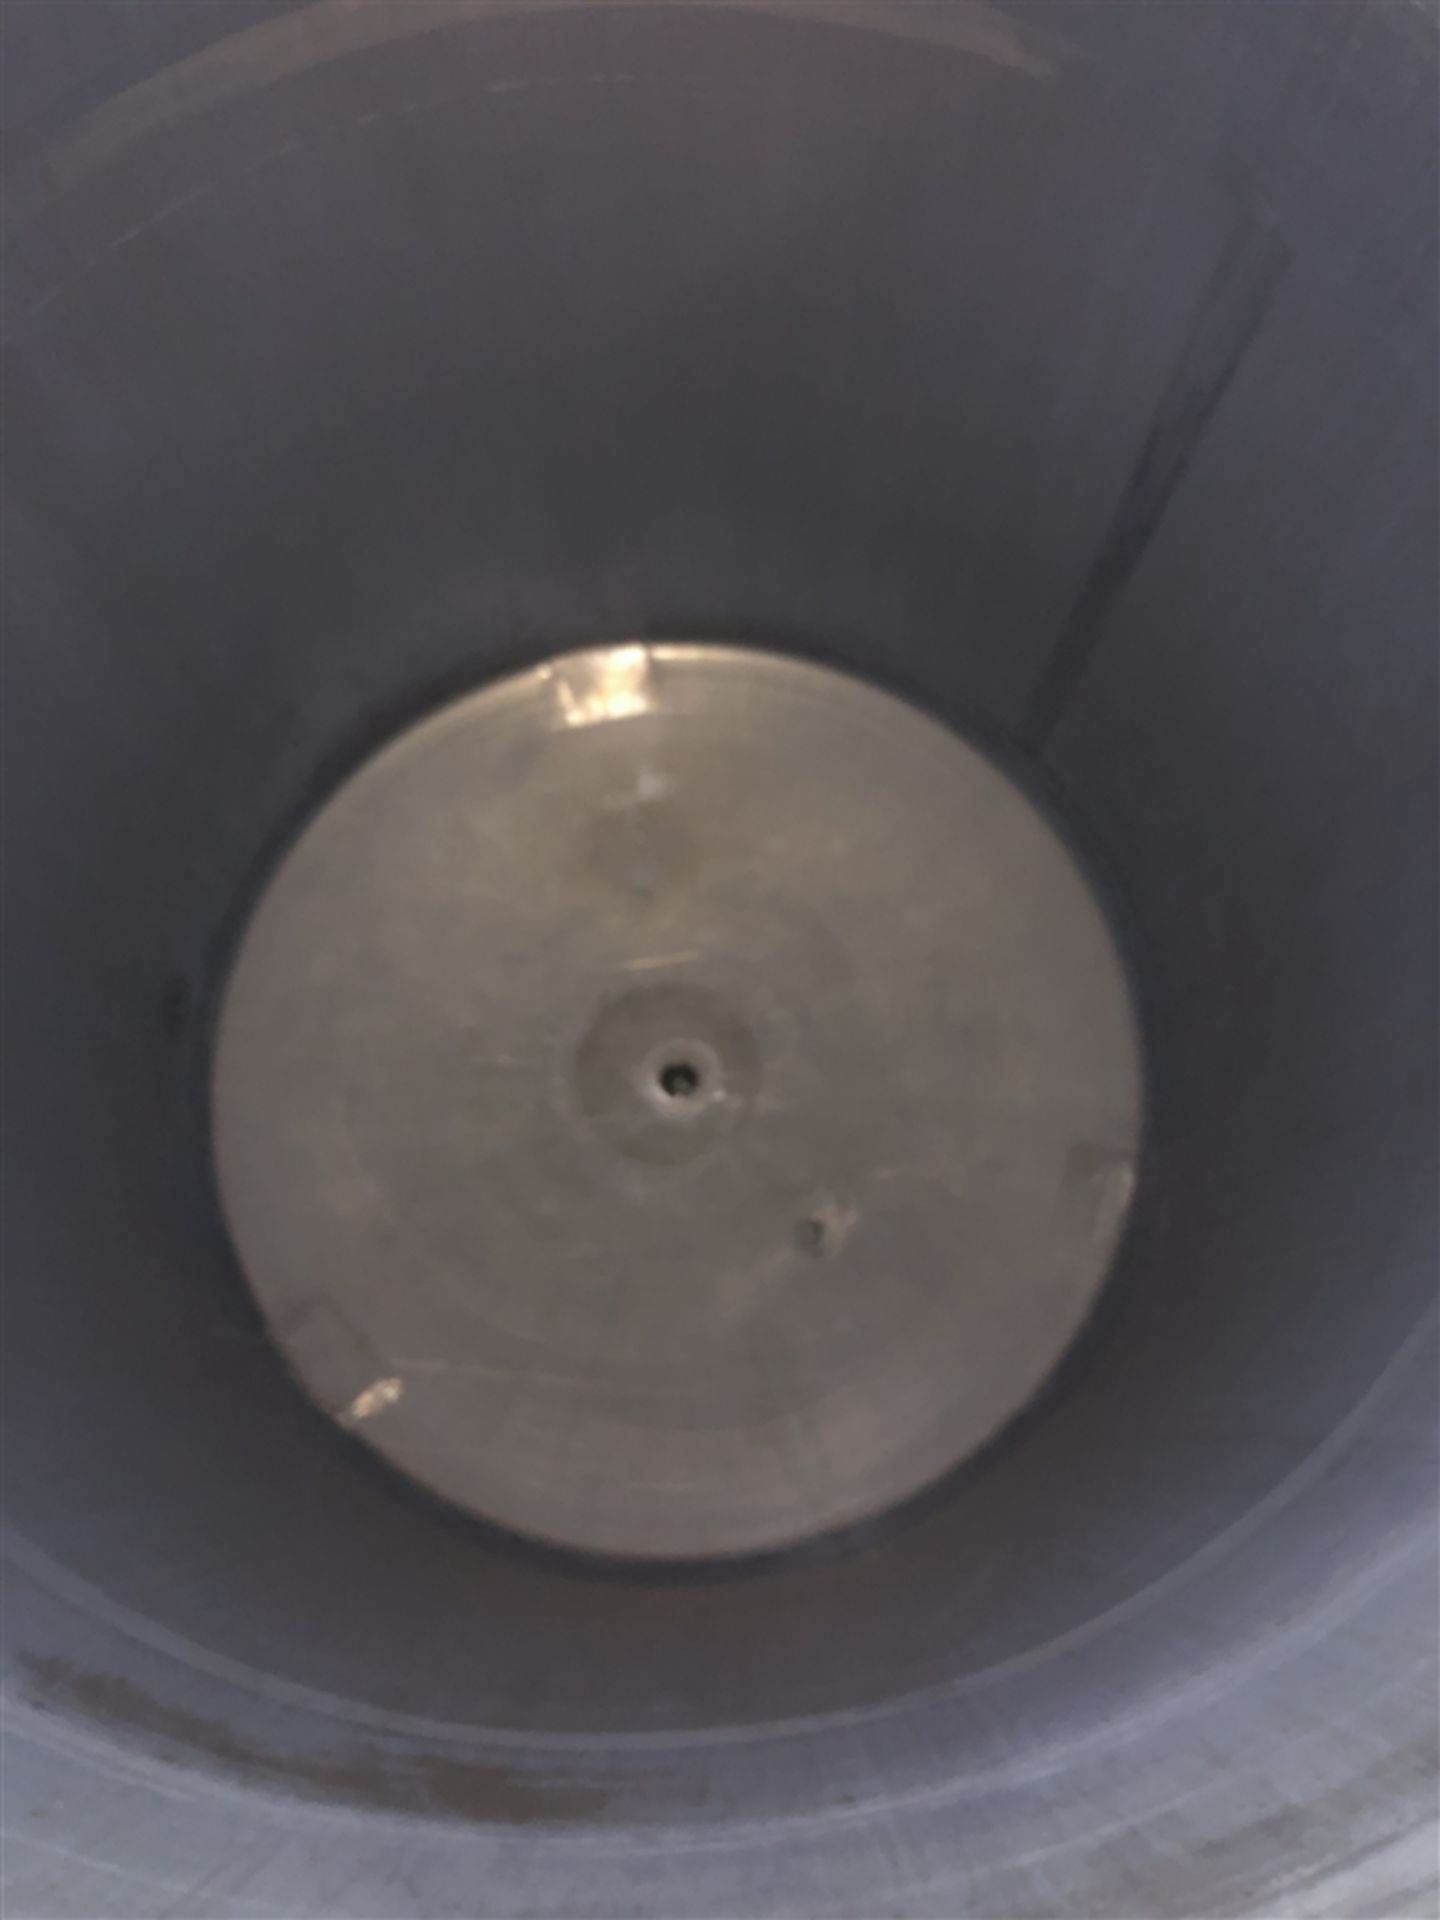 10,000 Litre stainless steel holding tank - Image 3 of 4